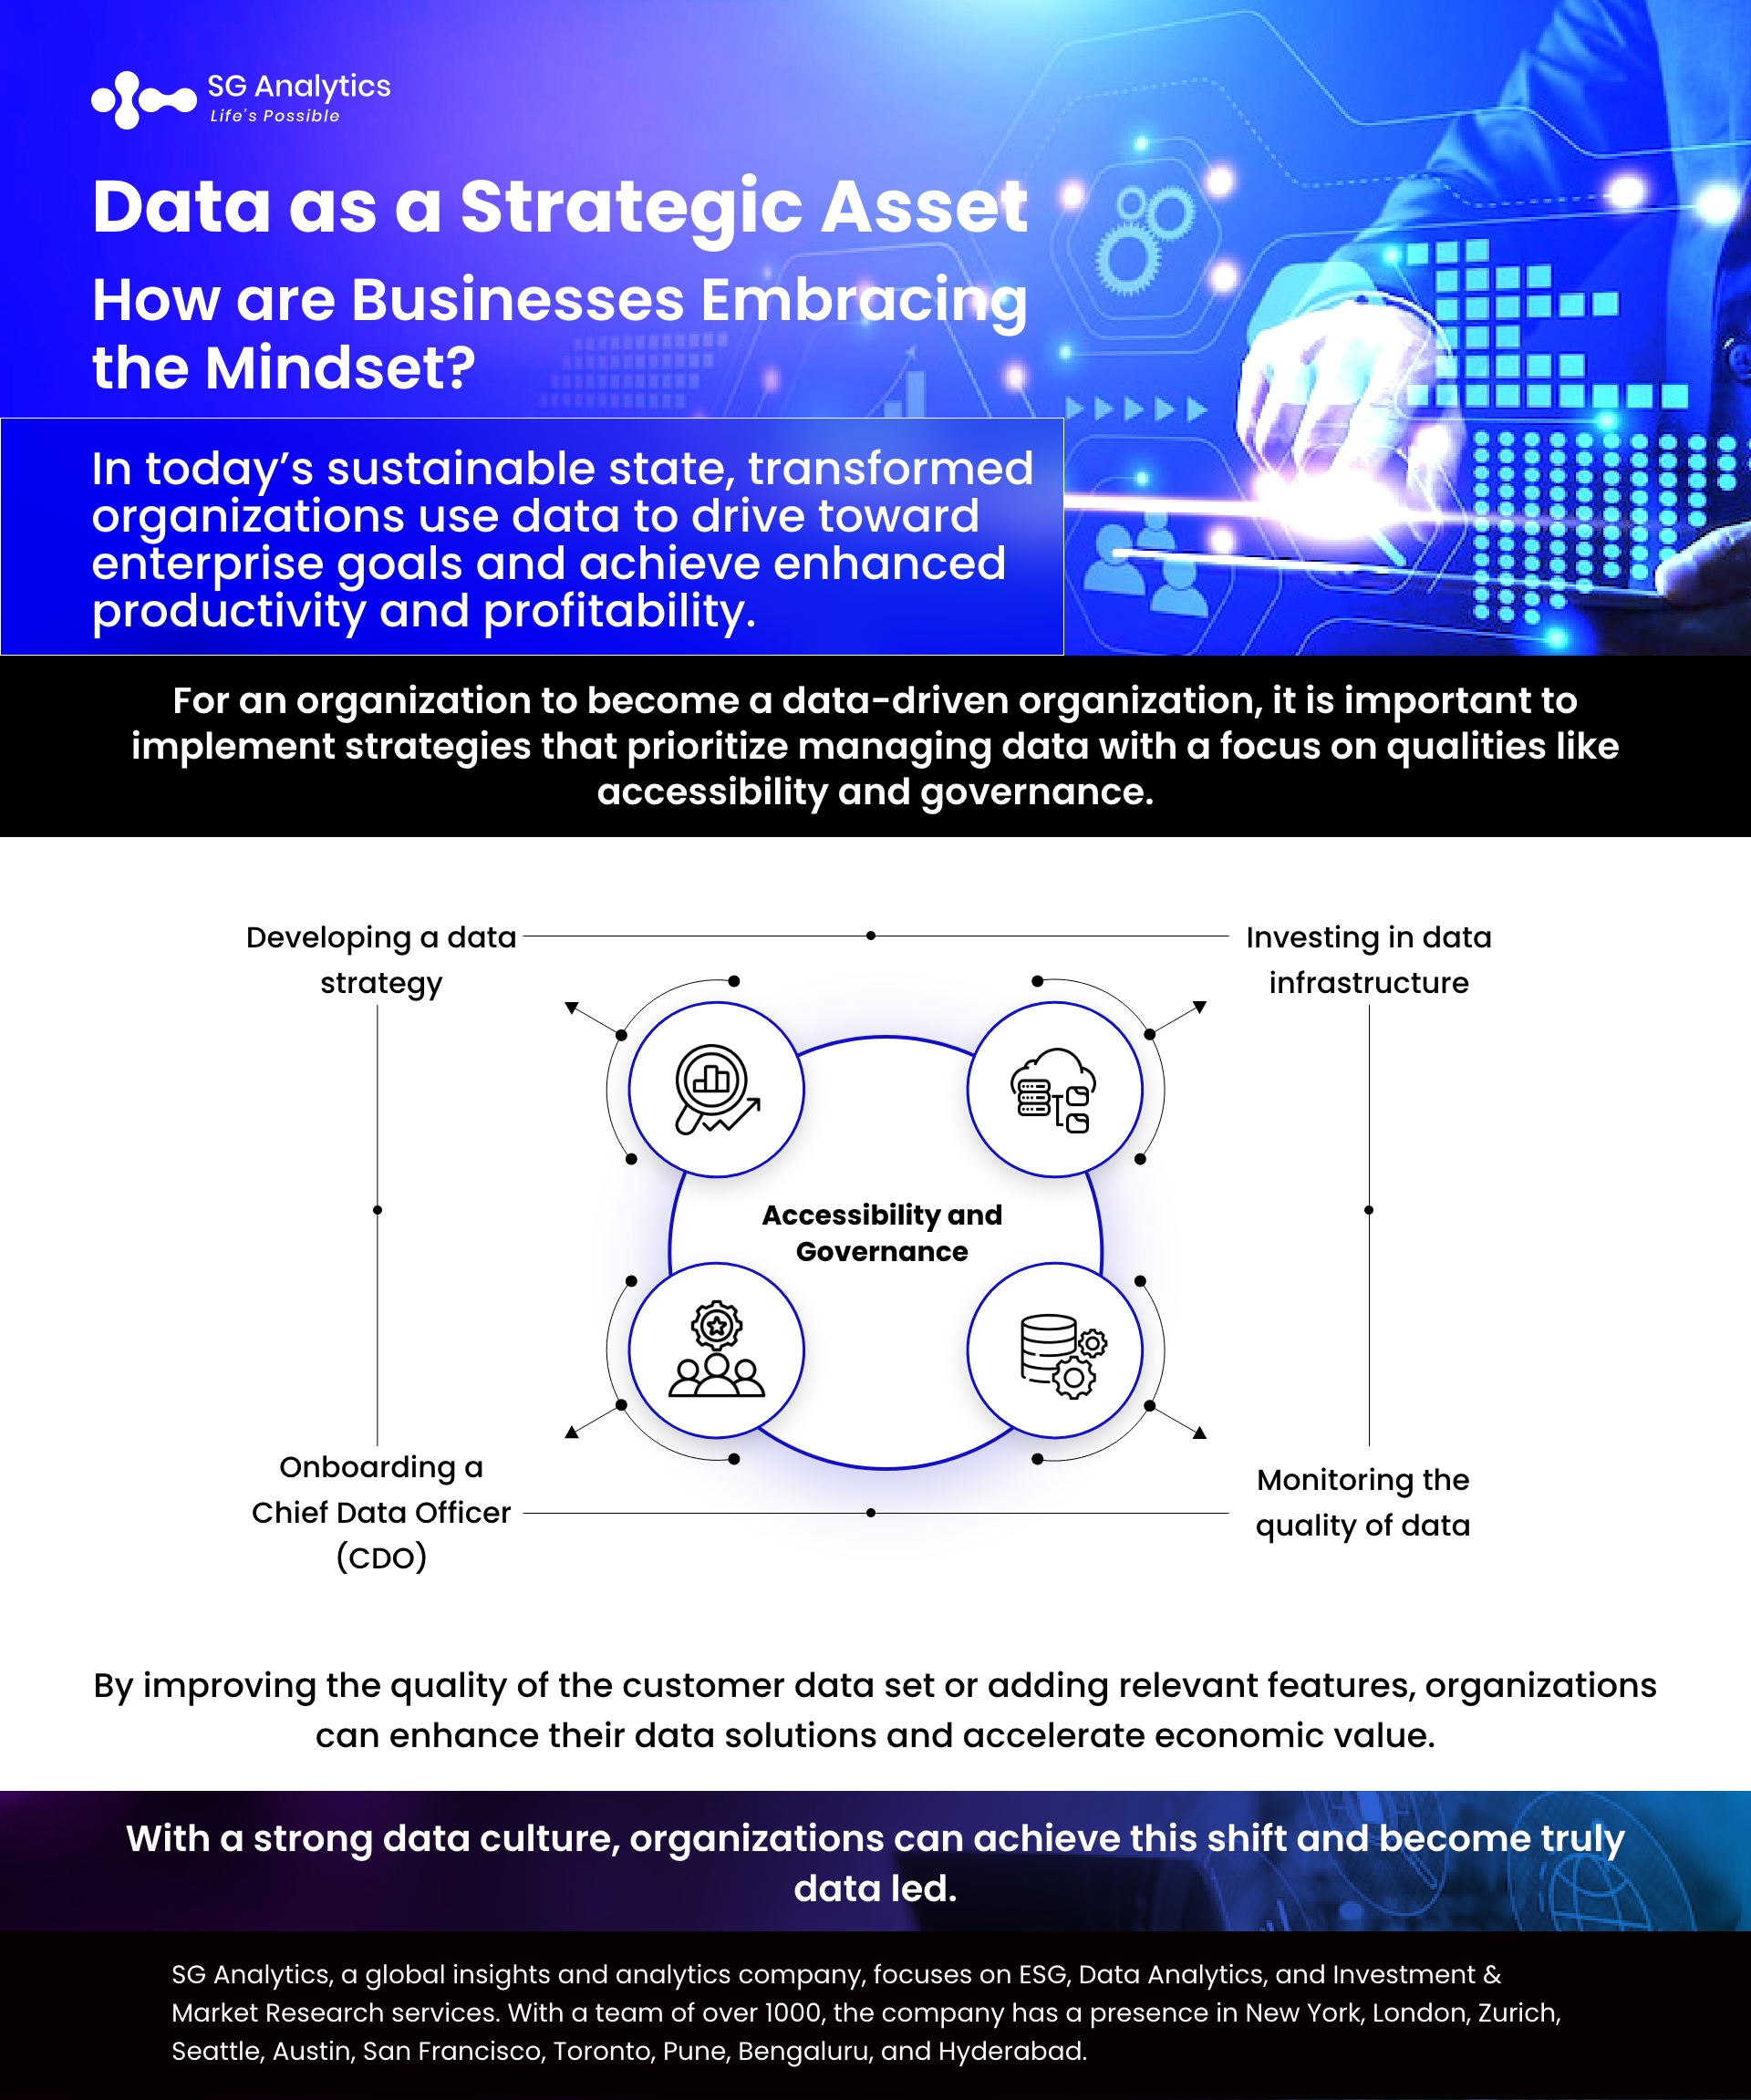 Data as a Strategic Asset - How are Businesses Embracing the Mindset